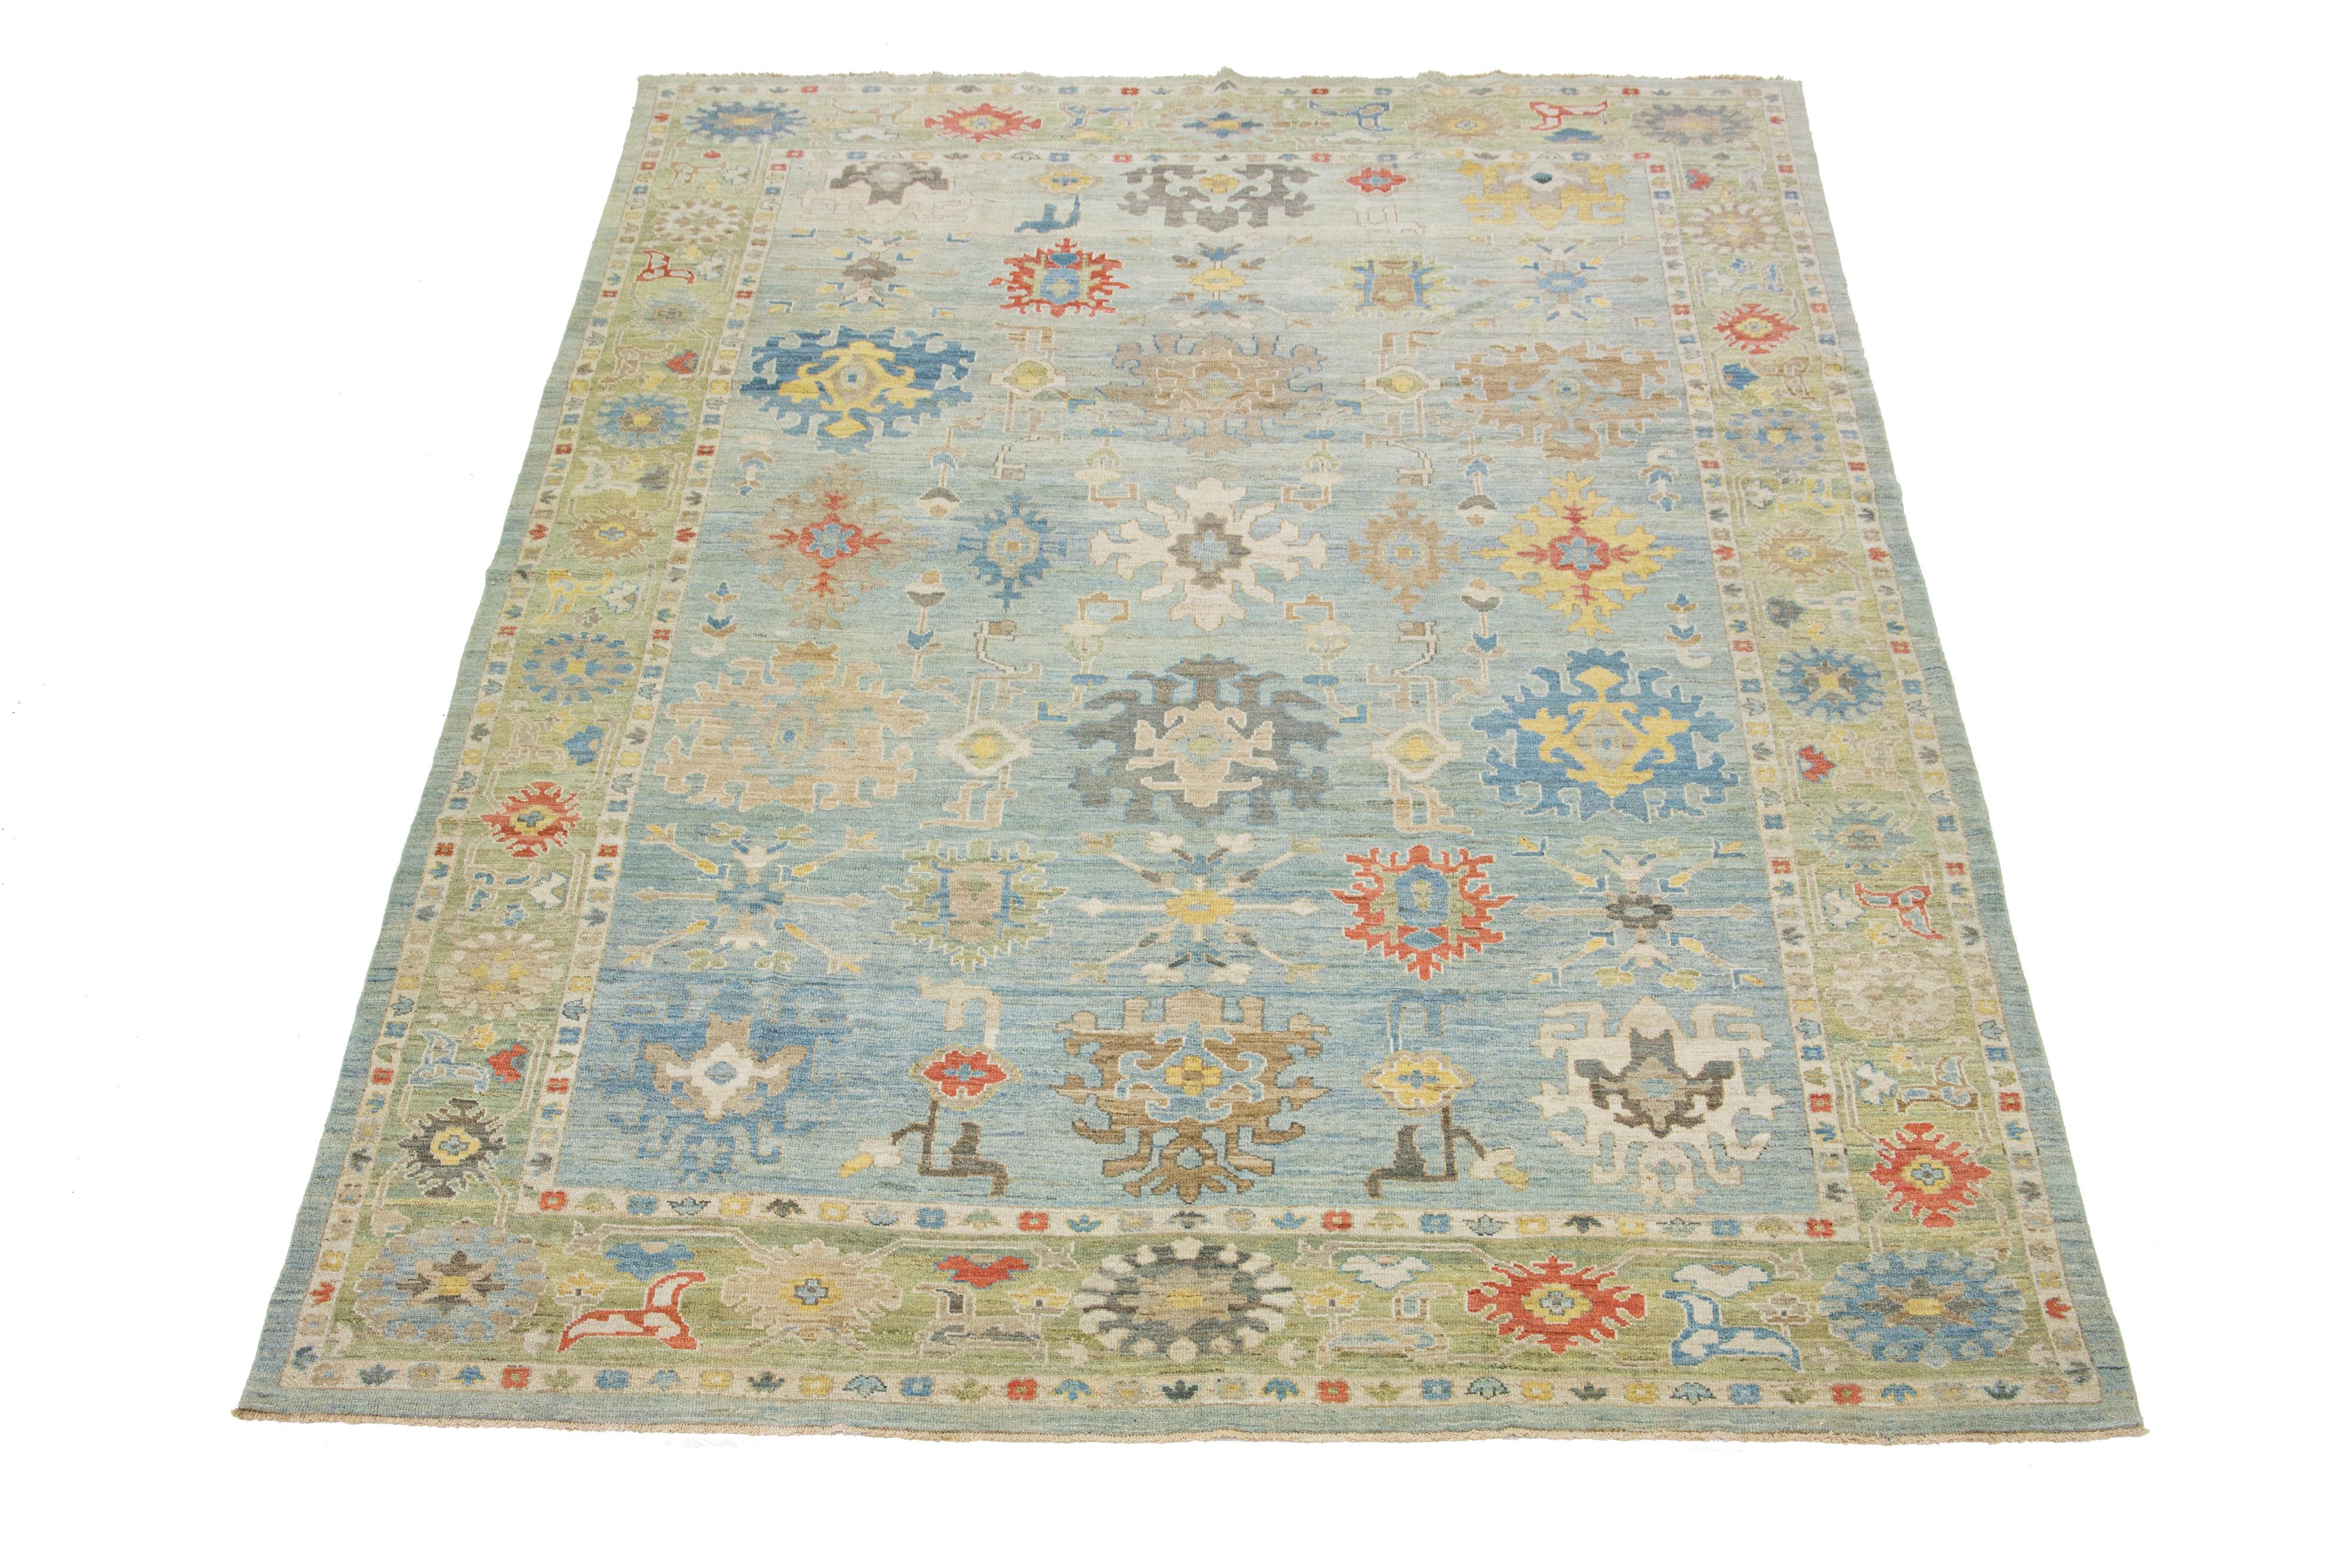 Beautiful room-size modern Sultanabad hand-knotted wool rug with a light blue field. This Sultanabad rug has a green frame and multicolor accents in a gorgeous classic floral pattern design.

This rug measures 10'1